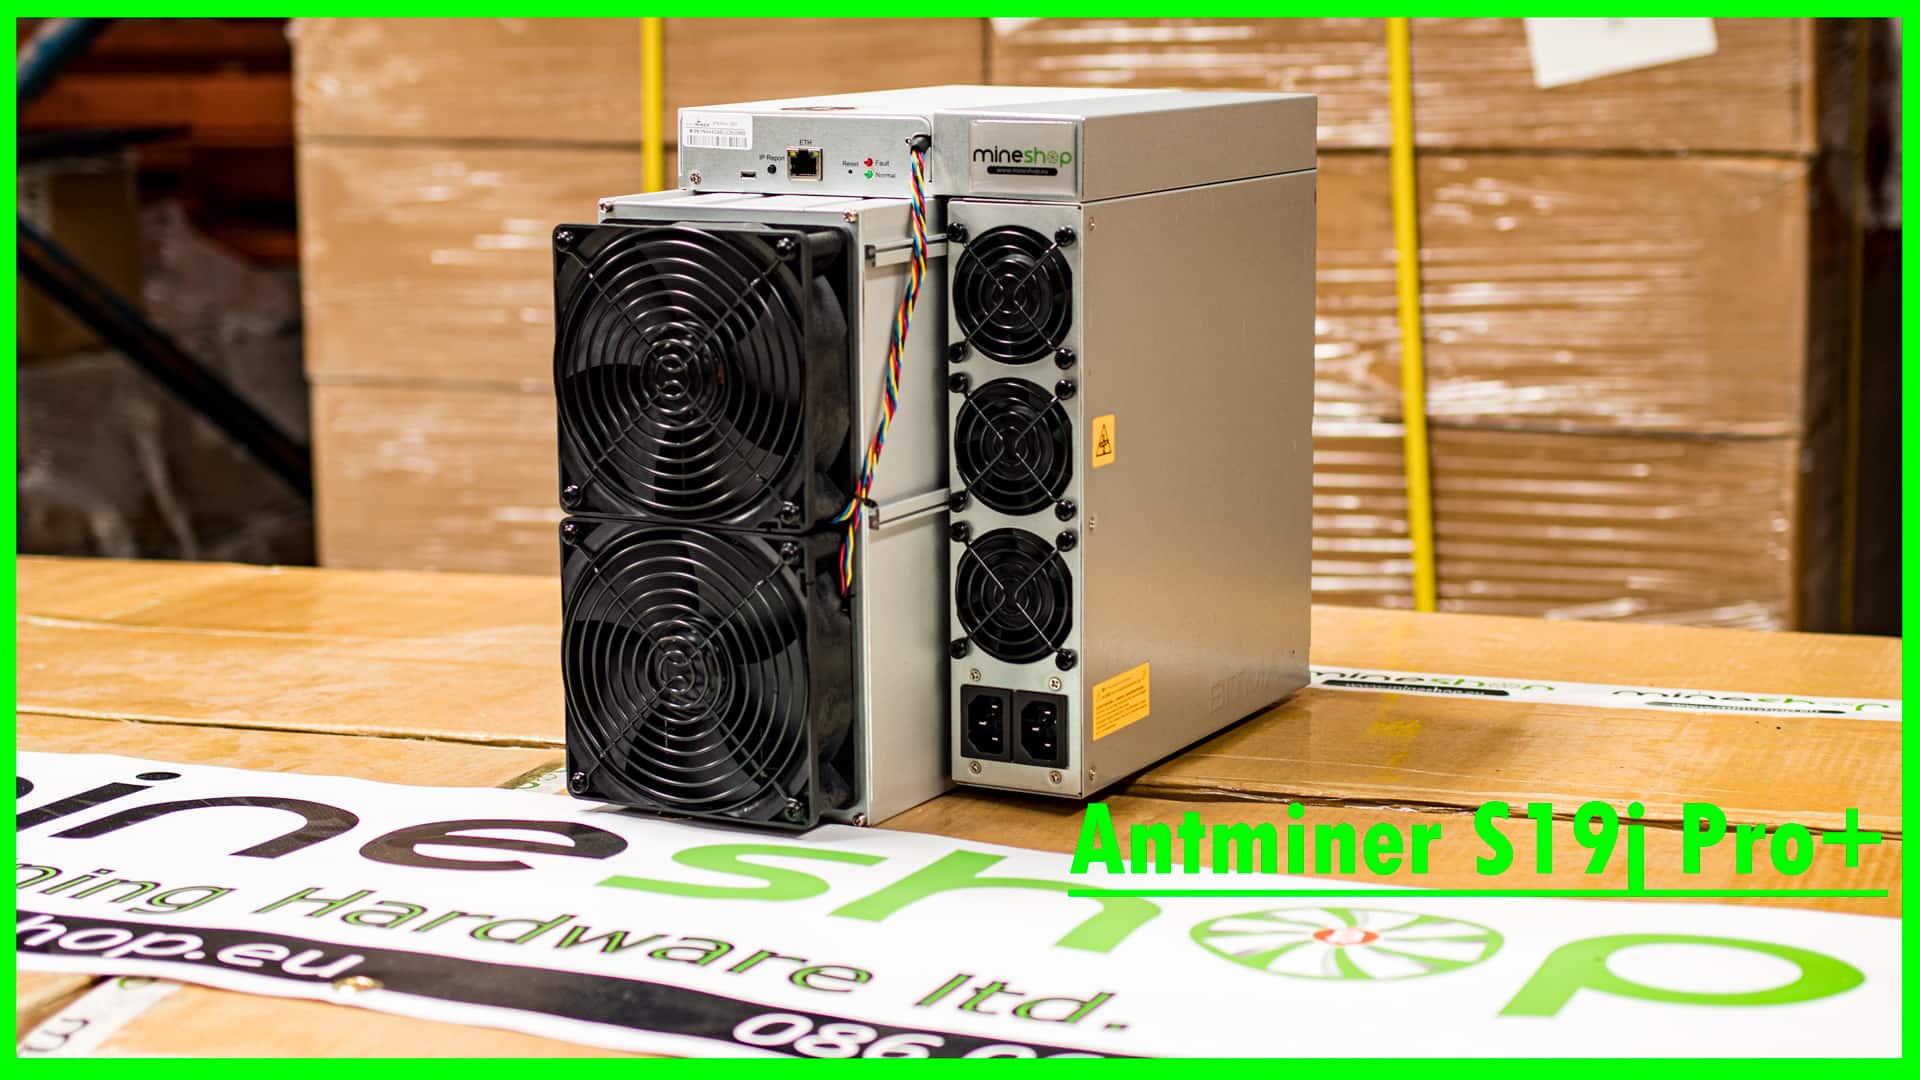 Antminer S21: Bitmain's Game Changer in the Bitcoin Mining World